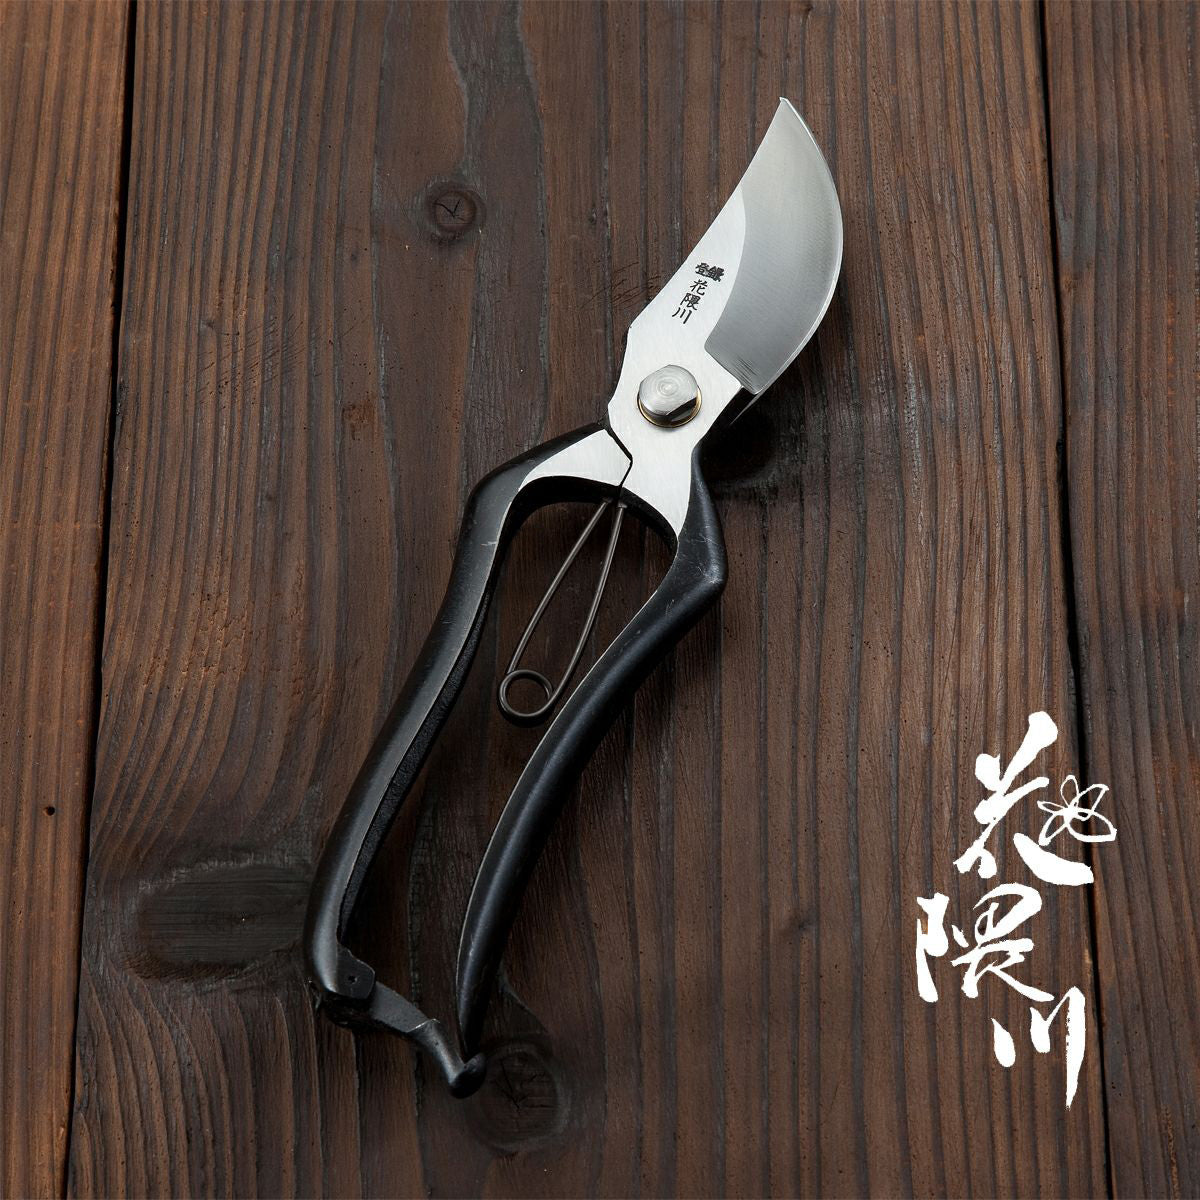 The Floral Society Garden Pruners | Japanese White Pruners for Gardening